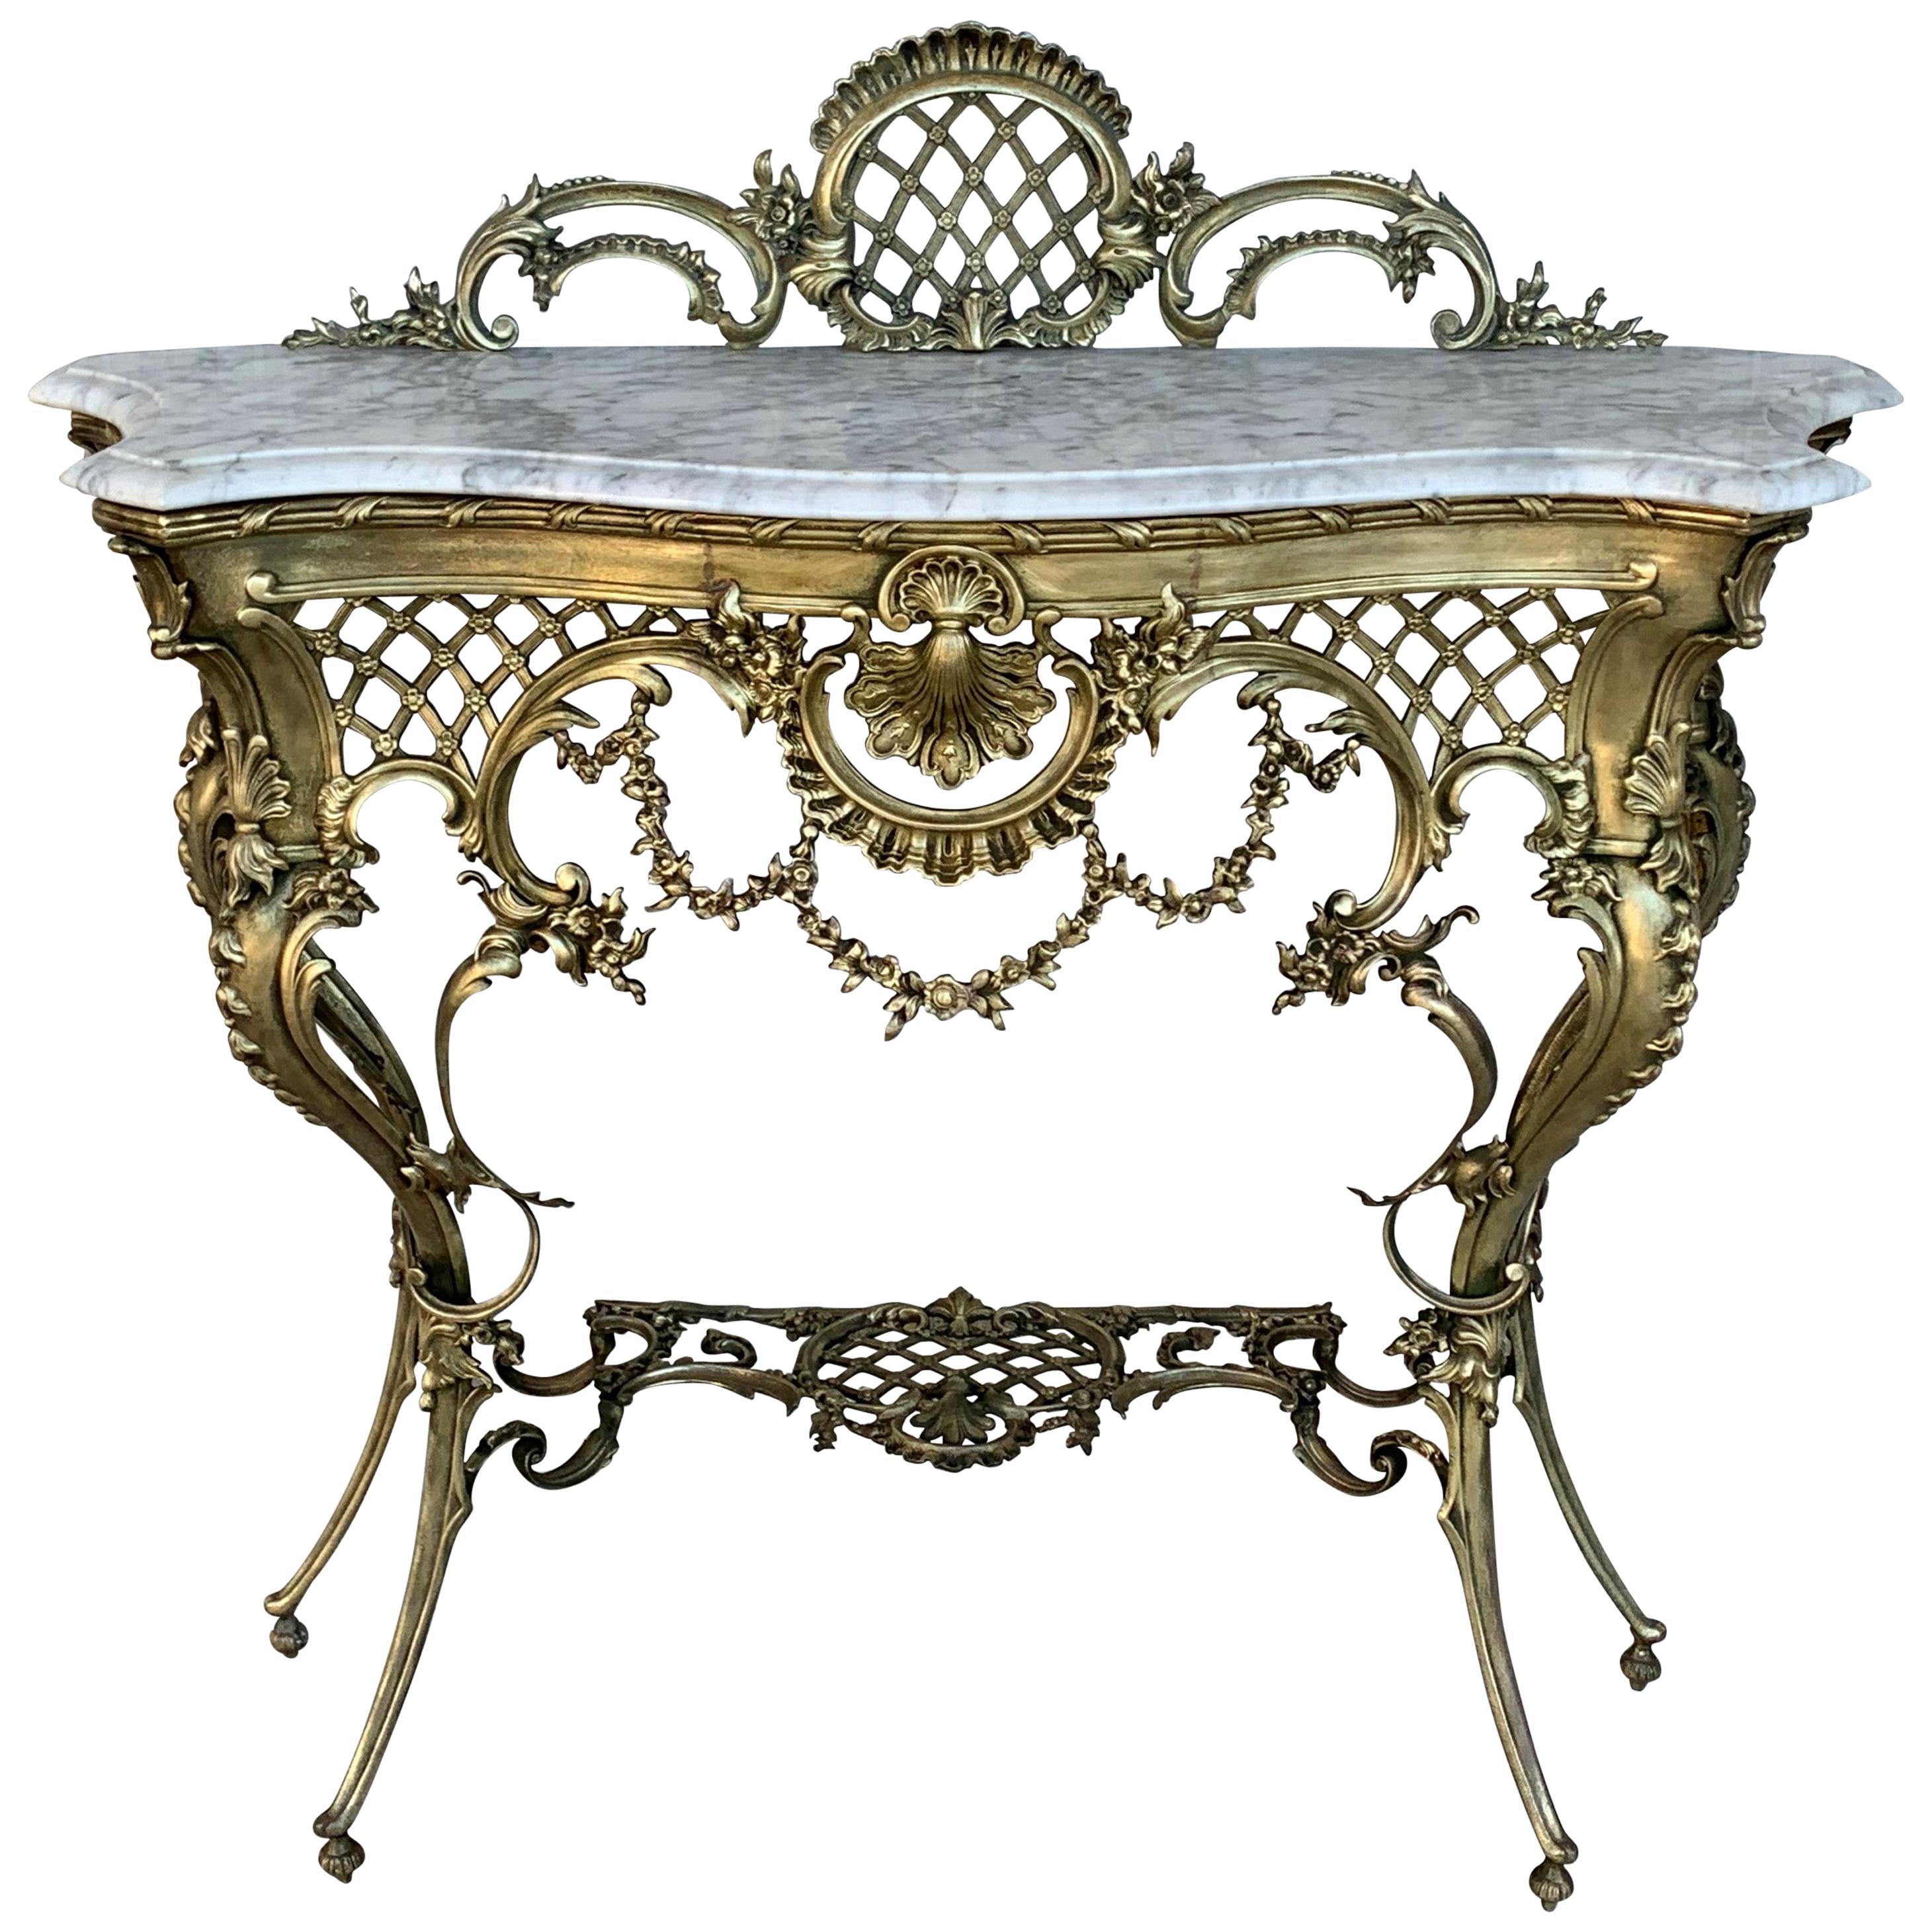 The white matble top with rounded corners mounted with an oval foliate decorated swivel bronze surmounted by a floral wreath and ribbon knot, raised on reeded legs joined by an interlaced stretcher and ending in toupie feet.
The console has a